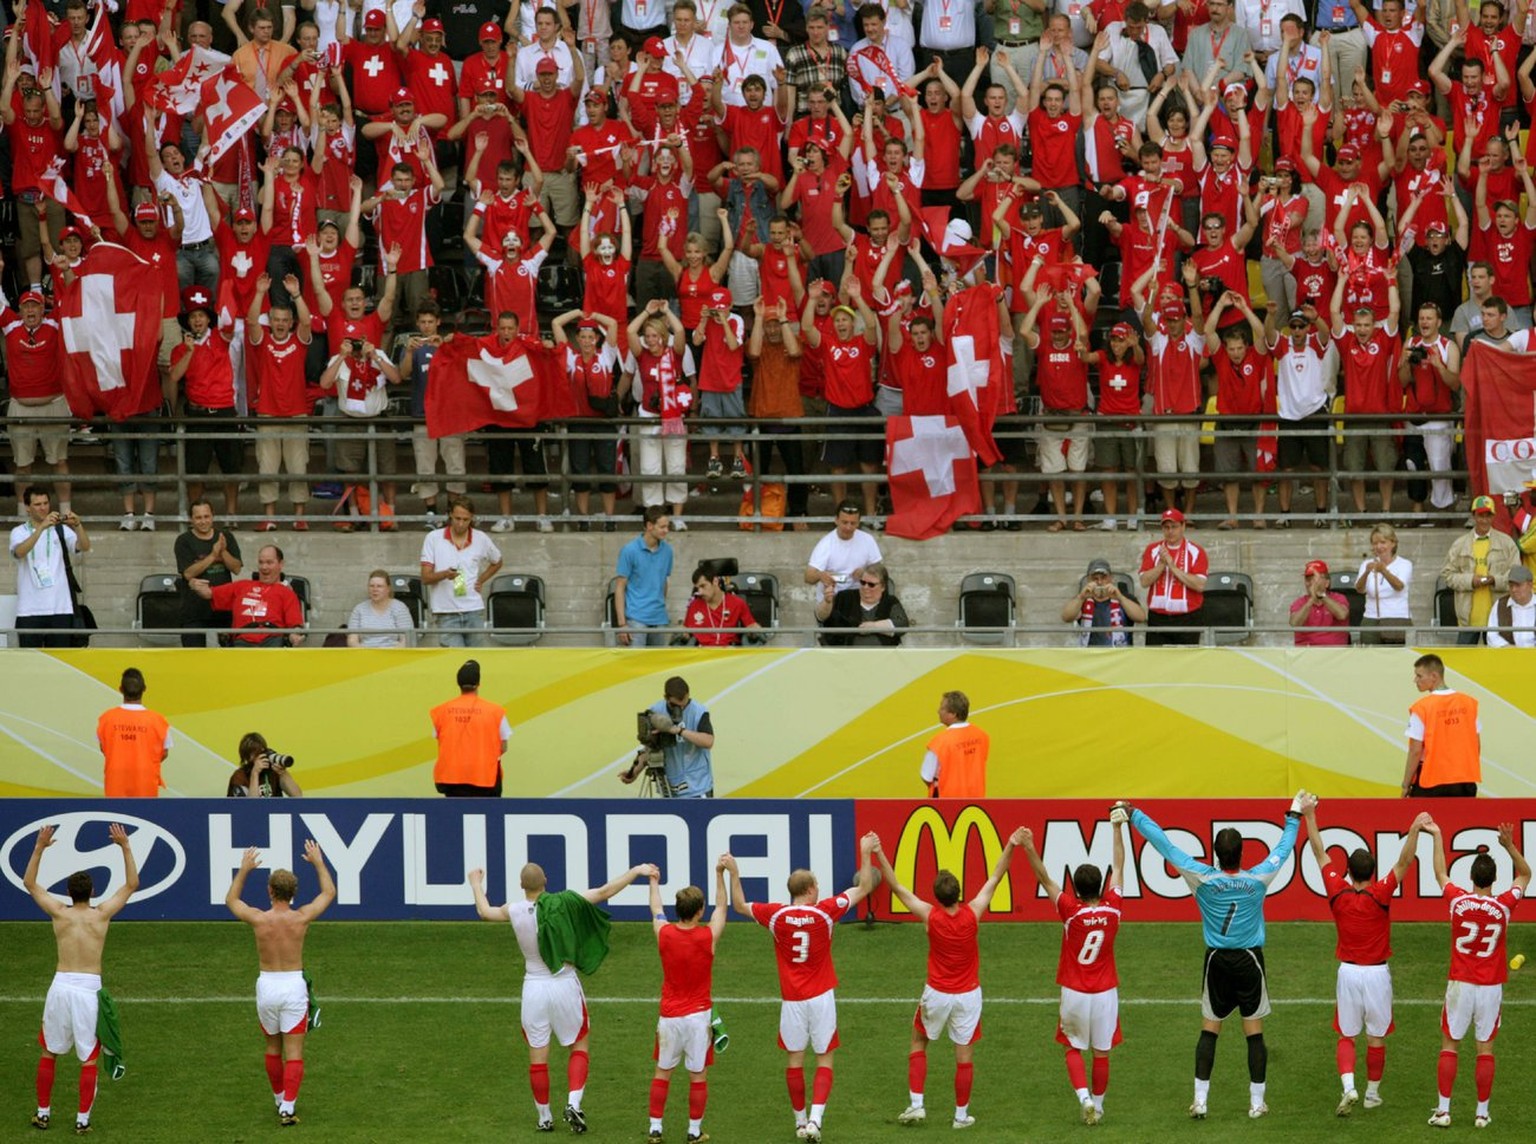 The players of the Swiss team celebrate with the fans after defeating Togo in the 2006 FIFA World Cup group G match of Togo vs Switzerland in Dortmund , Germany, Monday, 19 June, 2006. Switzerland won ...